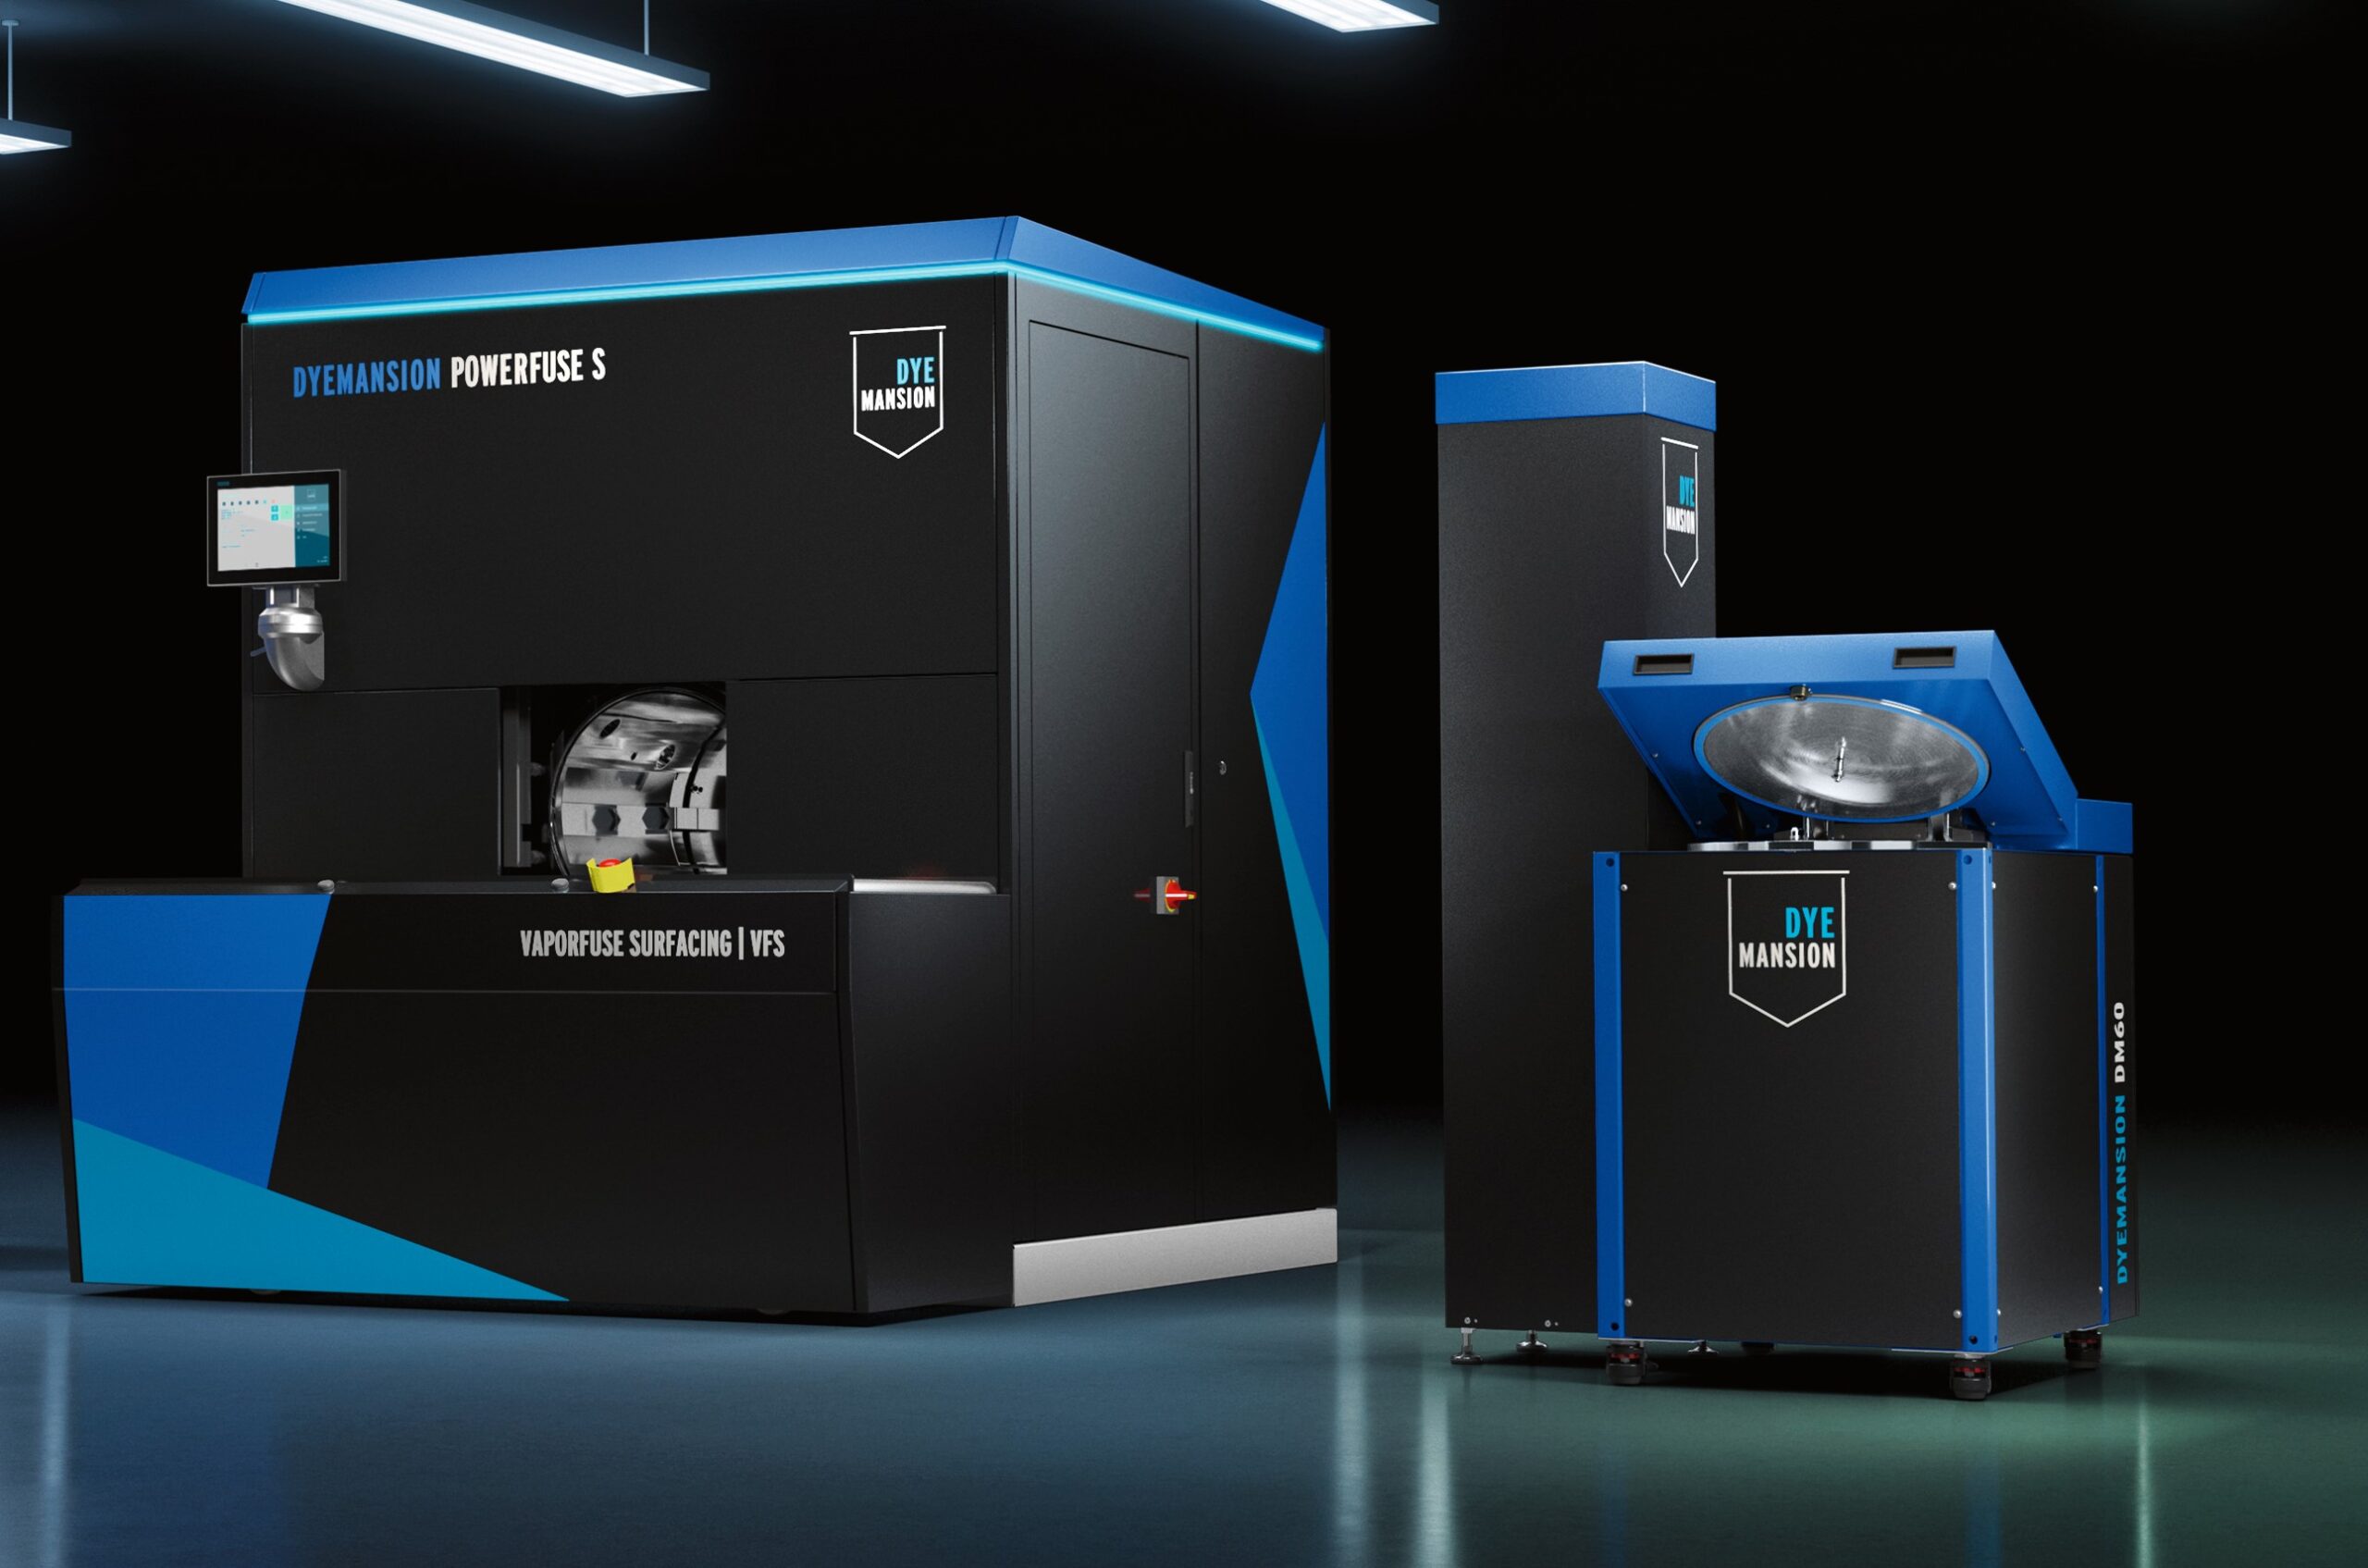 SNL Creative proudly announces the Addition of DyeMansion’s Powerfuse S and DM60 Full Color Systems